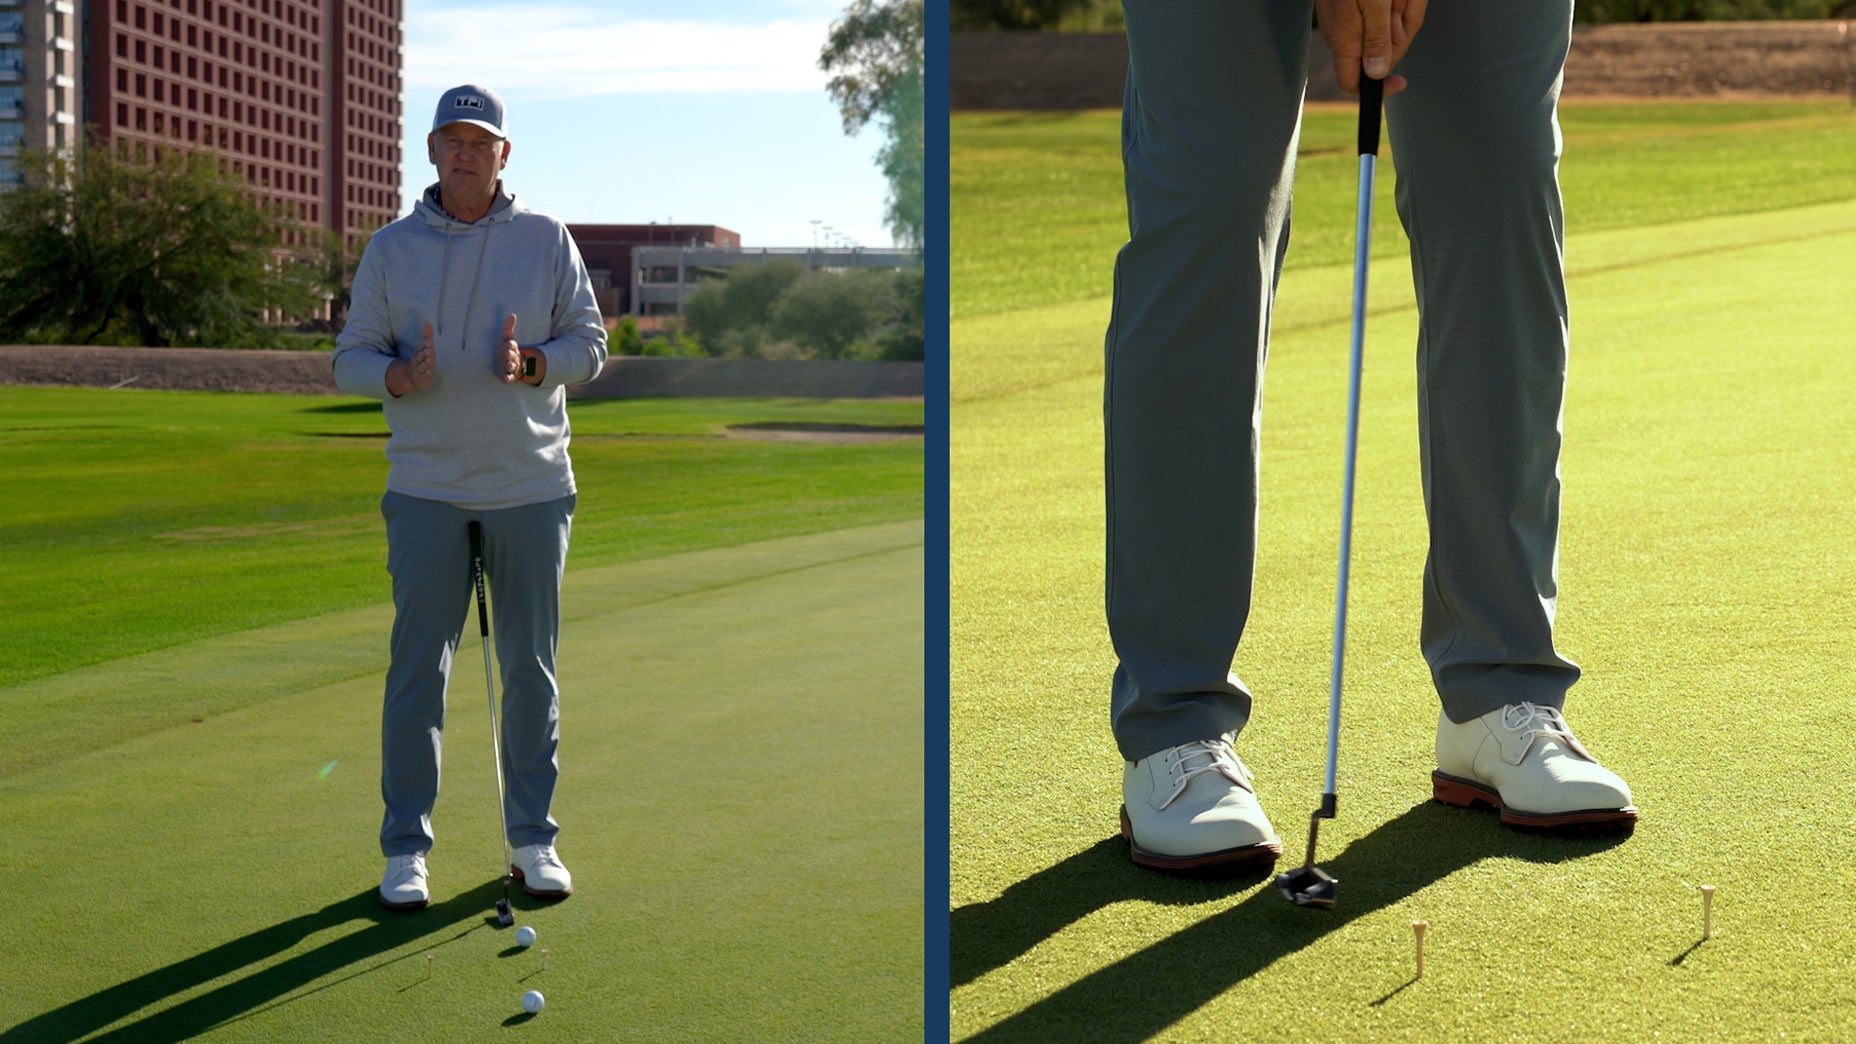 GOLF Top 100 Teacher Jon Tattersall shares a putting drill for amateurs to stop focusing on direction and work on mastering distance control